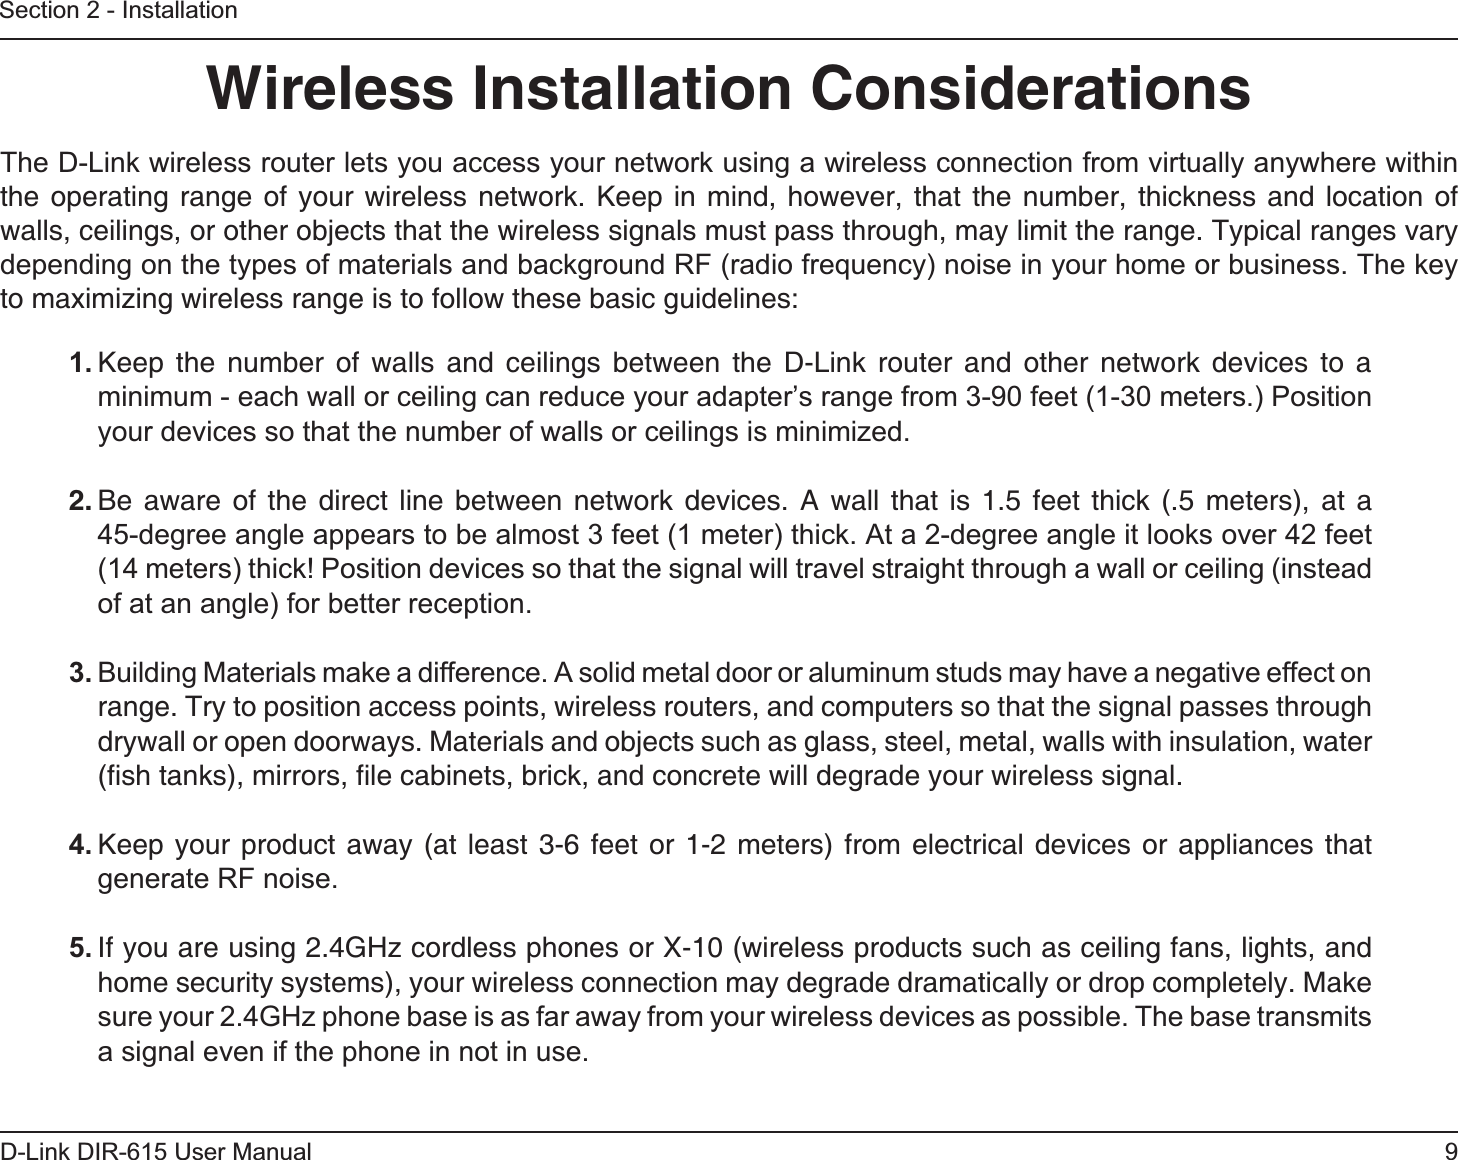 9D-Link DIR-615 User ManualSection 2 - InstallationWireless Installation ConsiderationsThe D-Link wireless router lets you access your network using a wireless connection from virtually anywhere within the operating range of your wireless network. Keep in mind, however, that the number, thickness and location of walls, ceilings, or other objects that the wireless signals must pass through, may limit the range. Typical ranges vary depending on the types of materials and background RF (radio frequency) noise in your home or business. The key to maximizing wireless range is to follow these basic guidelines:1. Keep the number of walls and ceilings between the D-Link router and other network devices to a minimum - each wall or ceiling can reduce your adapter’s range from 3-90 feet (1-30 meters.) Position your devices so that the number of walls or ceilings is minimized.2. Be aware of the direct line between network devices. A wall that is 1.5 feet thick (.5 meters), at a 45-degree angle appears to be almost 3 feet (1 meter) thick. At a 2-degree angle it looks over 42 feet (14 meters) thick! Position devices so that the signal will travel straight through a wall or ceiling (instead of at an angle) for better reception.3. Building Materials make a difference. A solid metal door or aluminum studs may have a negative effect on range. Try to position access points, wireless routers, and computers so that the signal passes through drywall or open doorways. Materials and objects such as glass, steel, metal, walls with insulation, water (ﬁsh tanks), mirrors, ﬁle cabinets, brick, and concrete will degrade your wireless signal.4. Keep your product away (at least 3-6 feet or 1-2 meters) from electrical devices or appliances that generate RF noise.5. If you are using 2.4GHz cordless phones or X-10 (wireless products such as ceiling fans, lights, and home security systems), your wireless connection may degrade dramatically or drop completely. Make sure your 2.4GHz phone base is as far away from your wireless devices as possible. The base transmits a signal even if the phone in not in use.